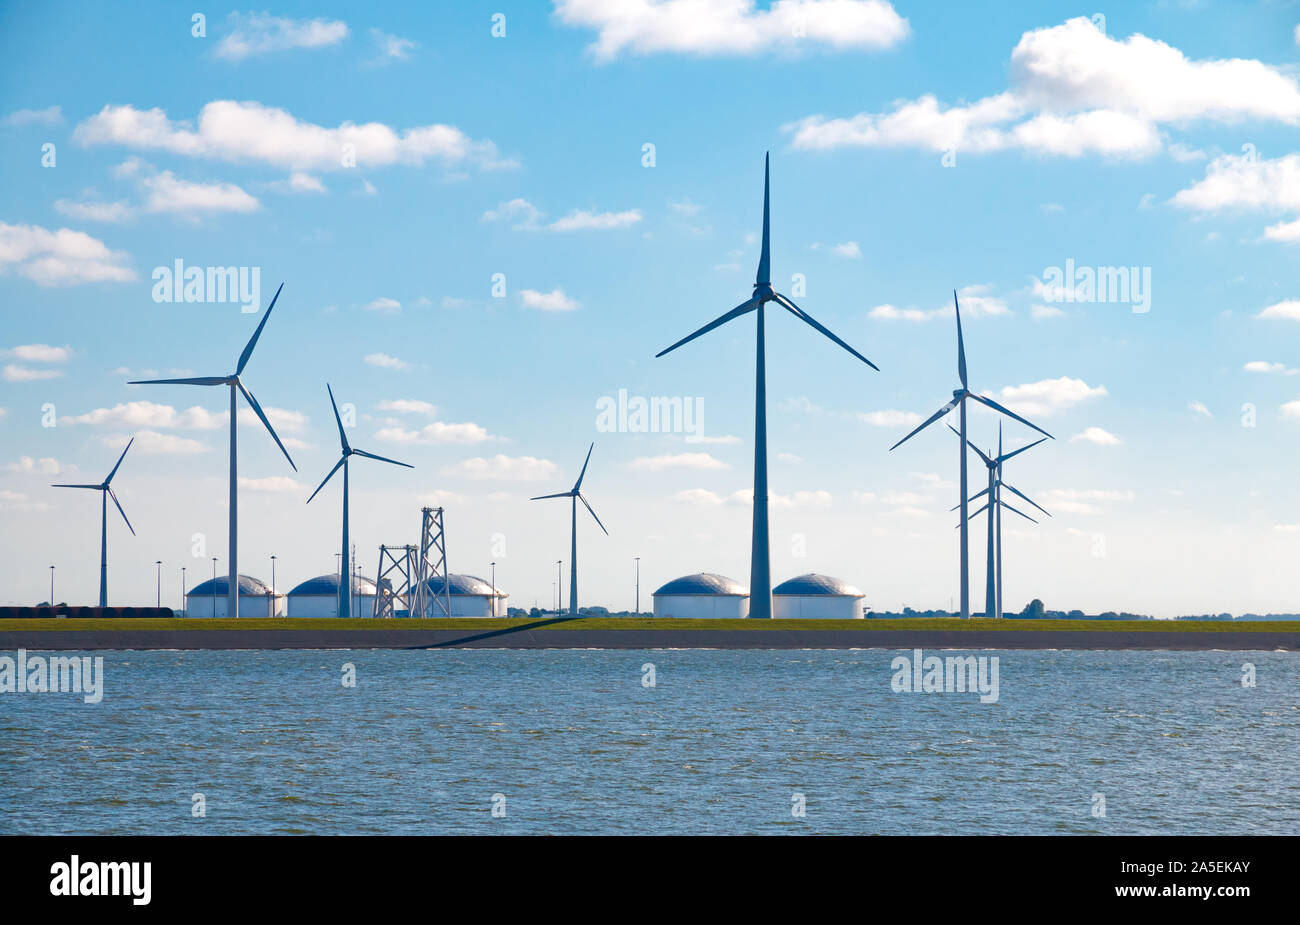 Contrast of an old and new source of energy: Wind turbines and oil storage tanks at the Eemshaven seaport in Groningen, Netherlands Stock Photo